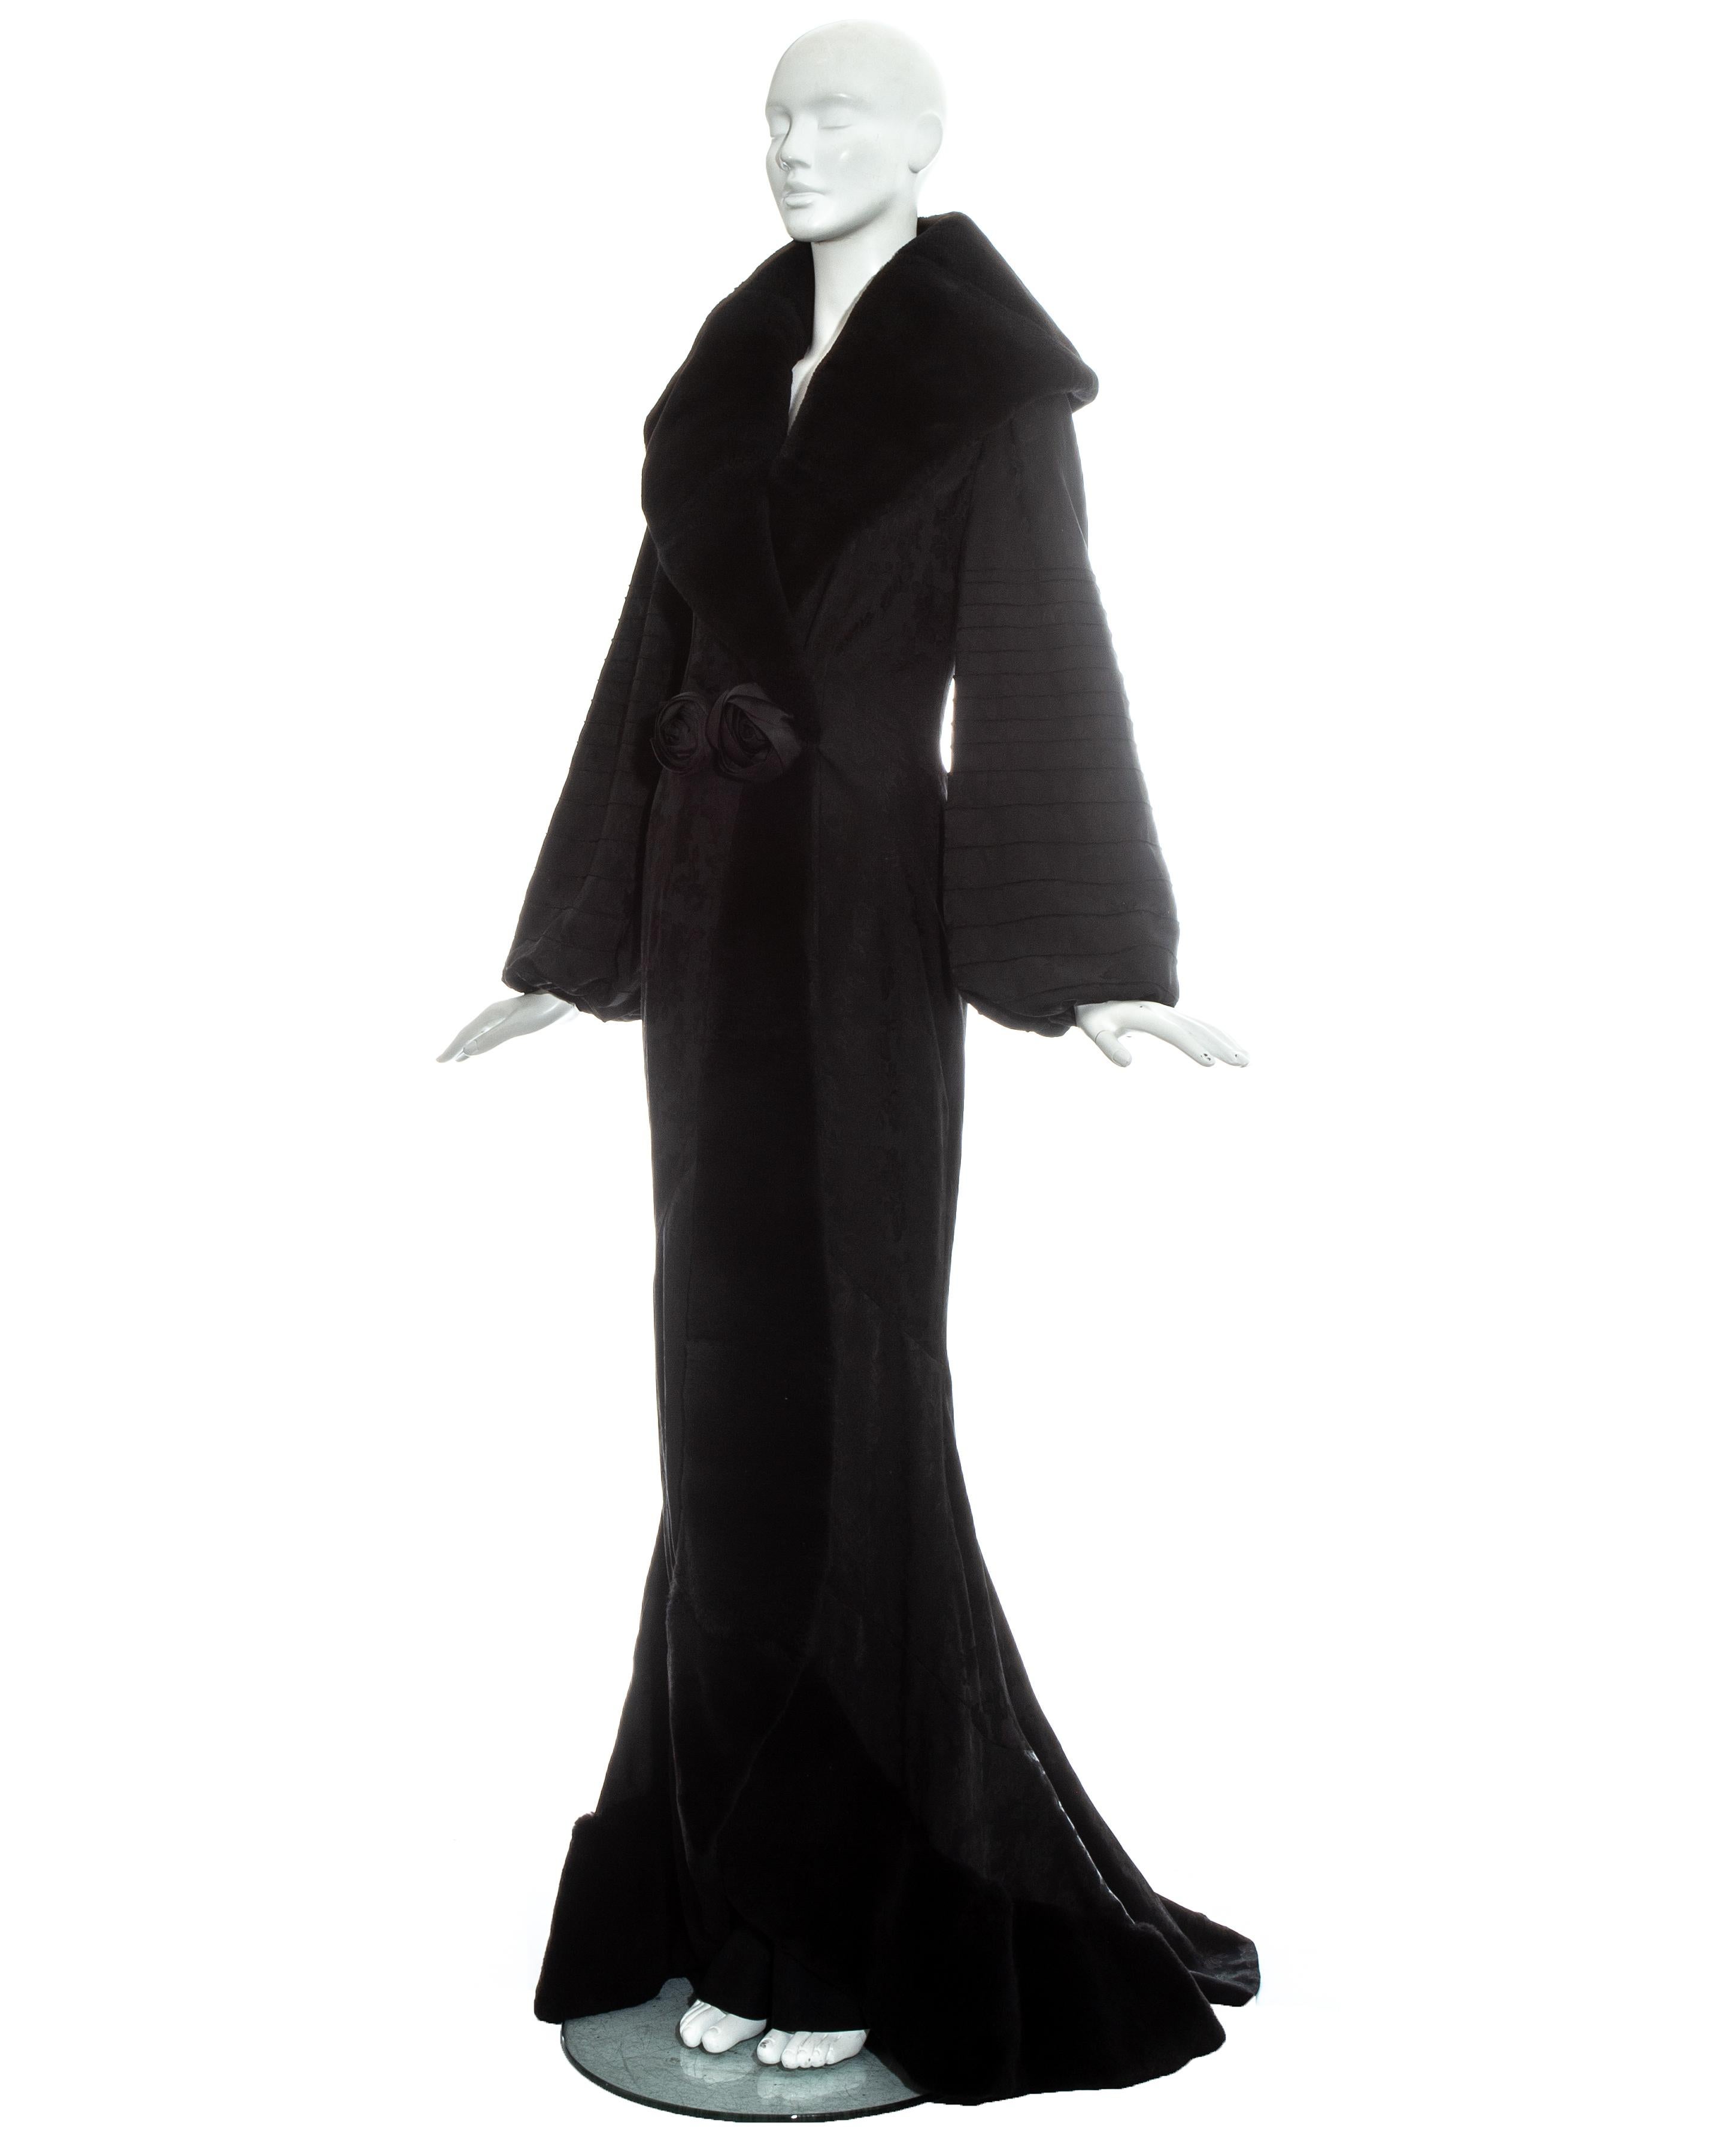 Christian Dior by John Galliano black lace and fur dress and robe, fw 1998 For Sale 3